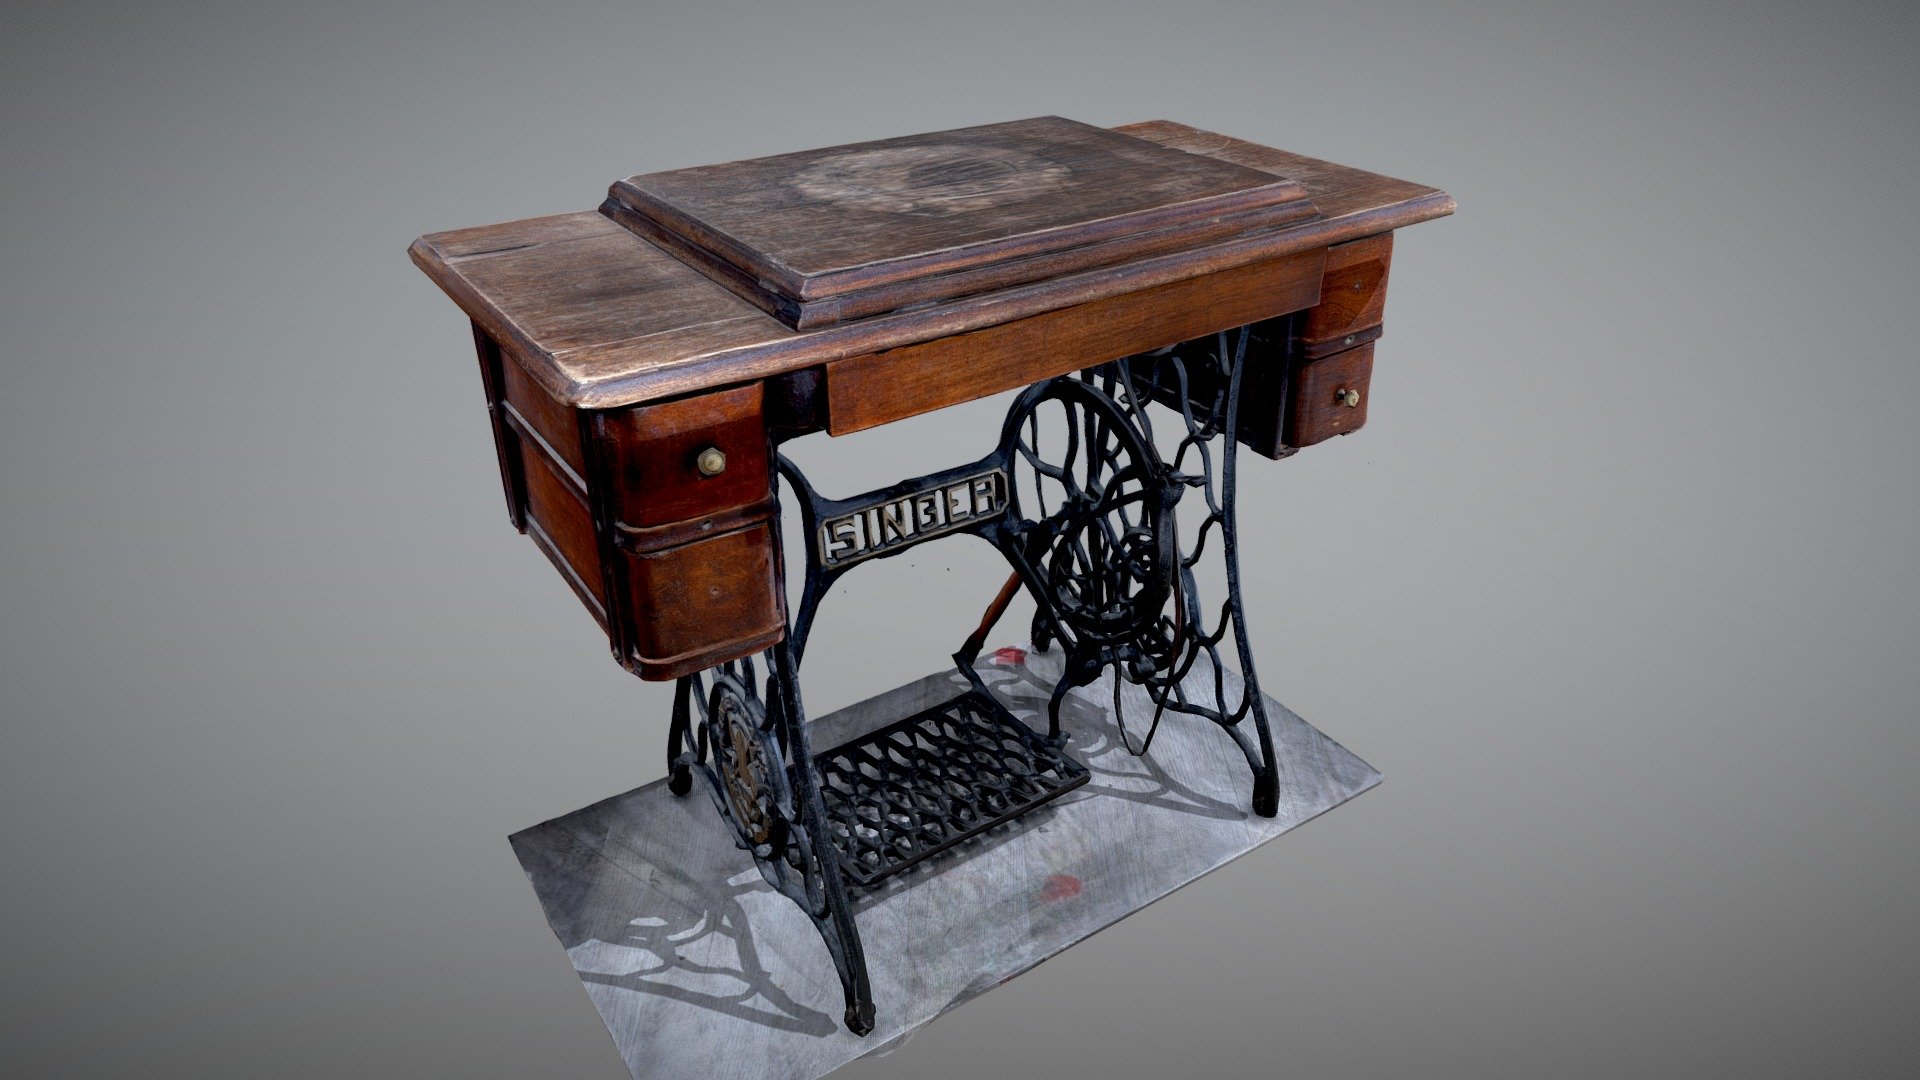 3D model of antique sewing machine by Singer right before renovation. Reduced. No retouch - SINGER Reduced - 3D model by Maciej Firko (@geoprofil) 3d model